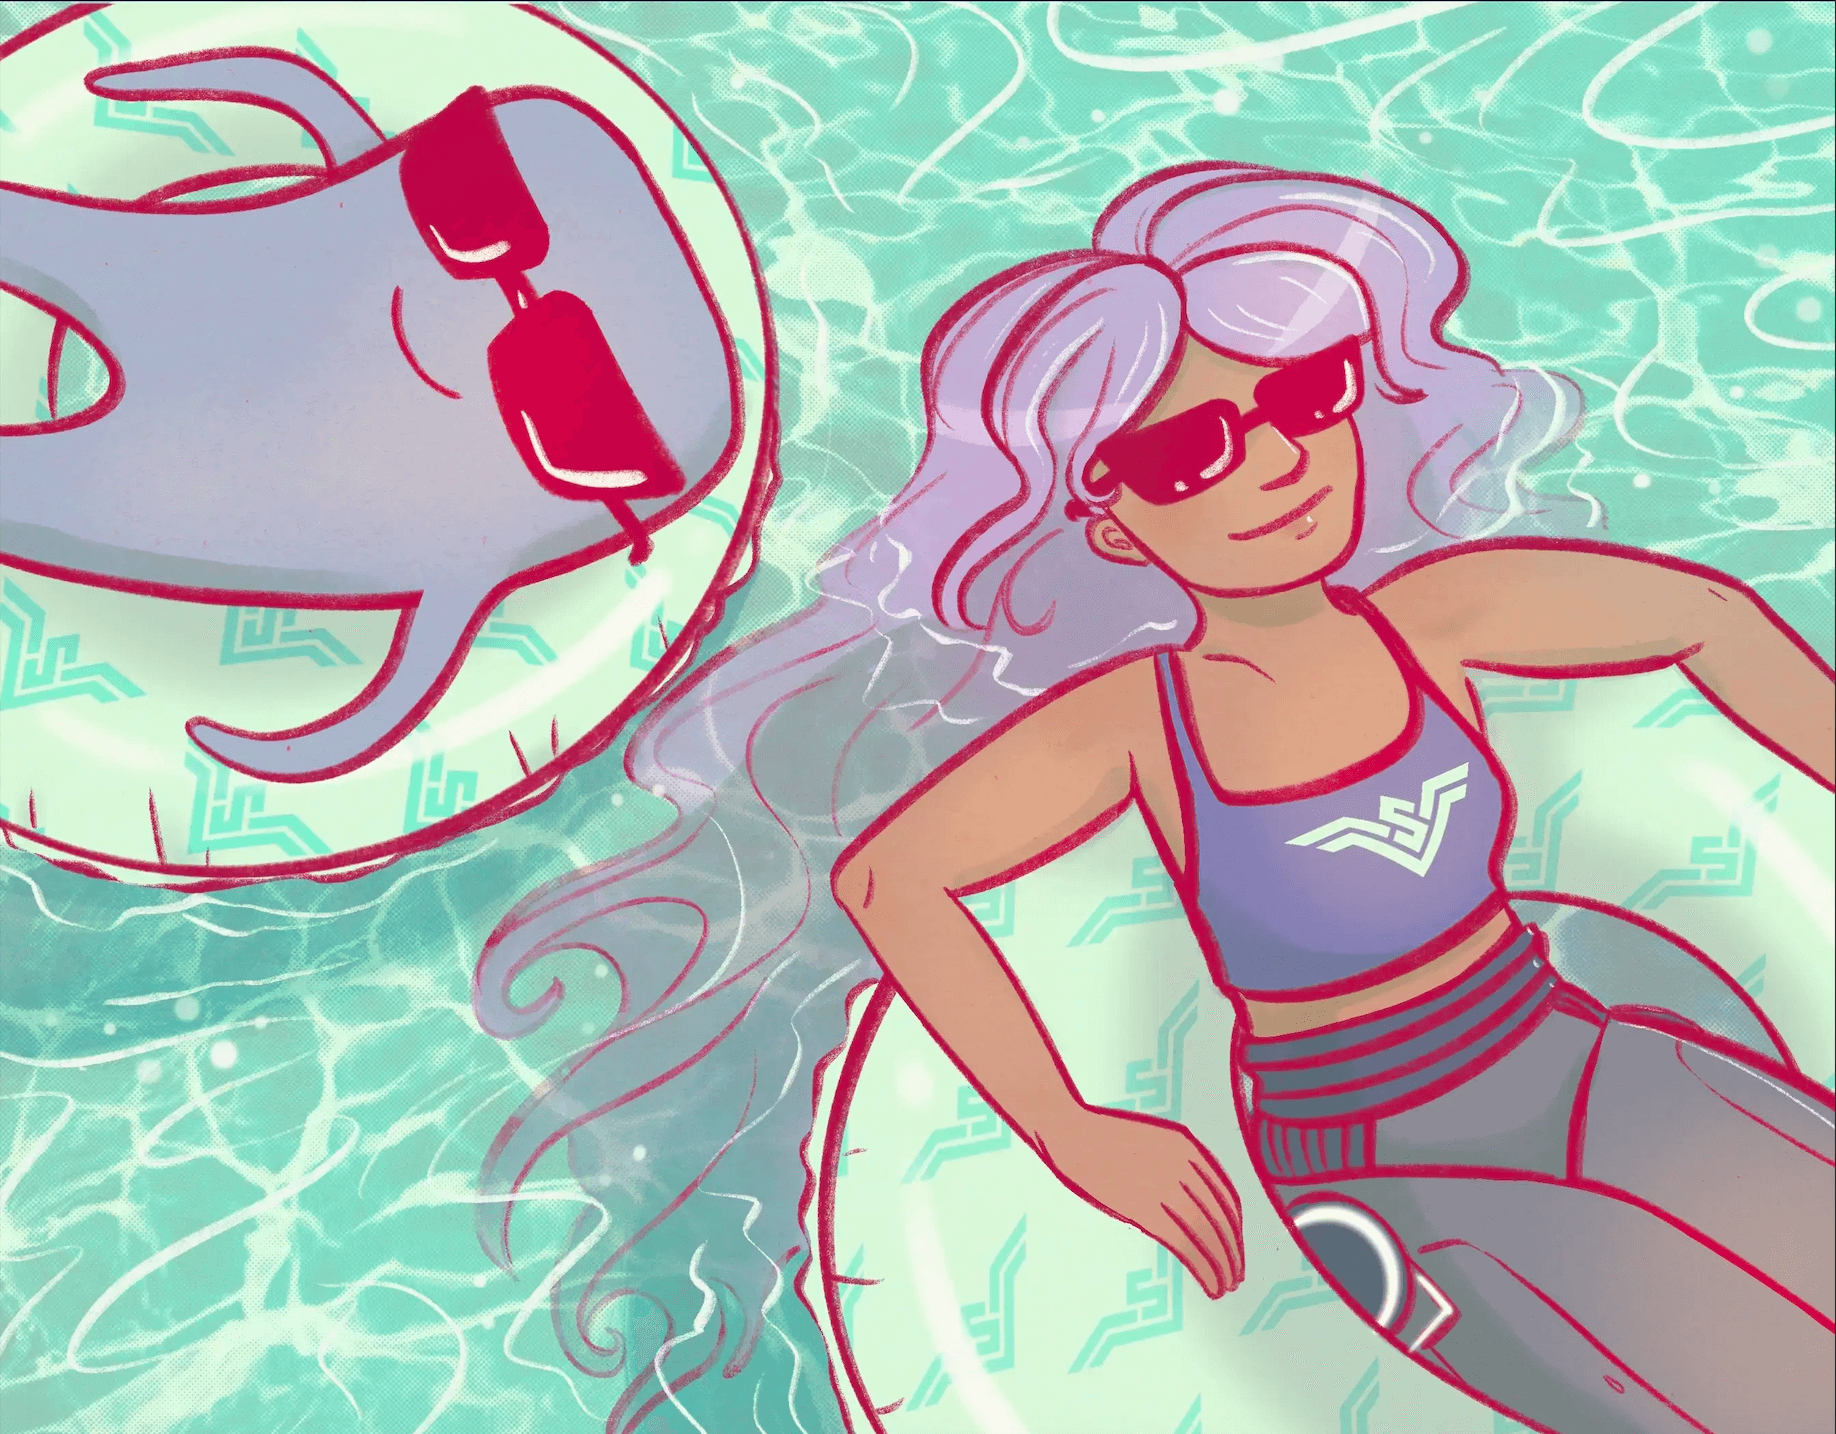 Sophia Bot and Shocky from SoWork's remote team chillin' in the pool